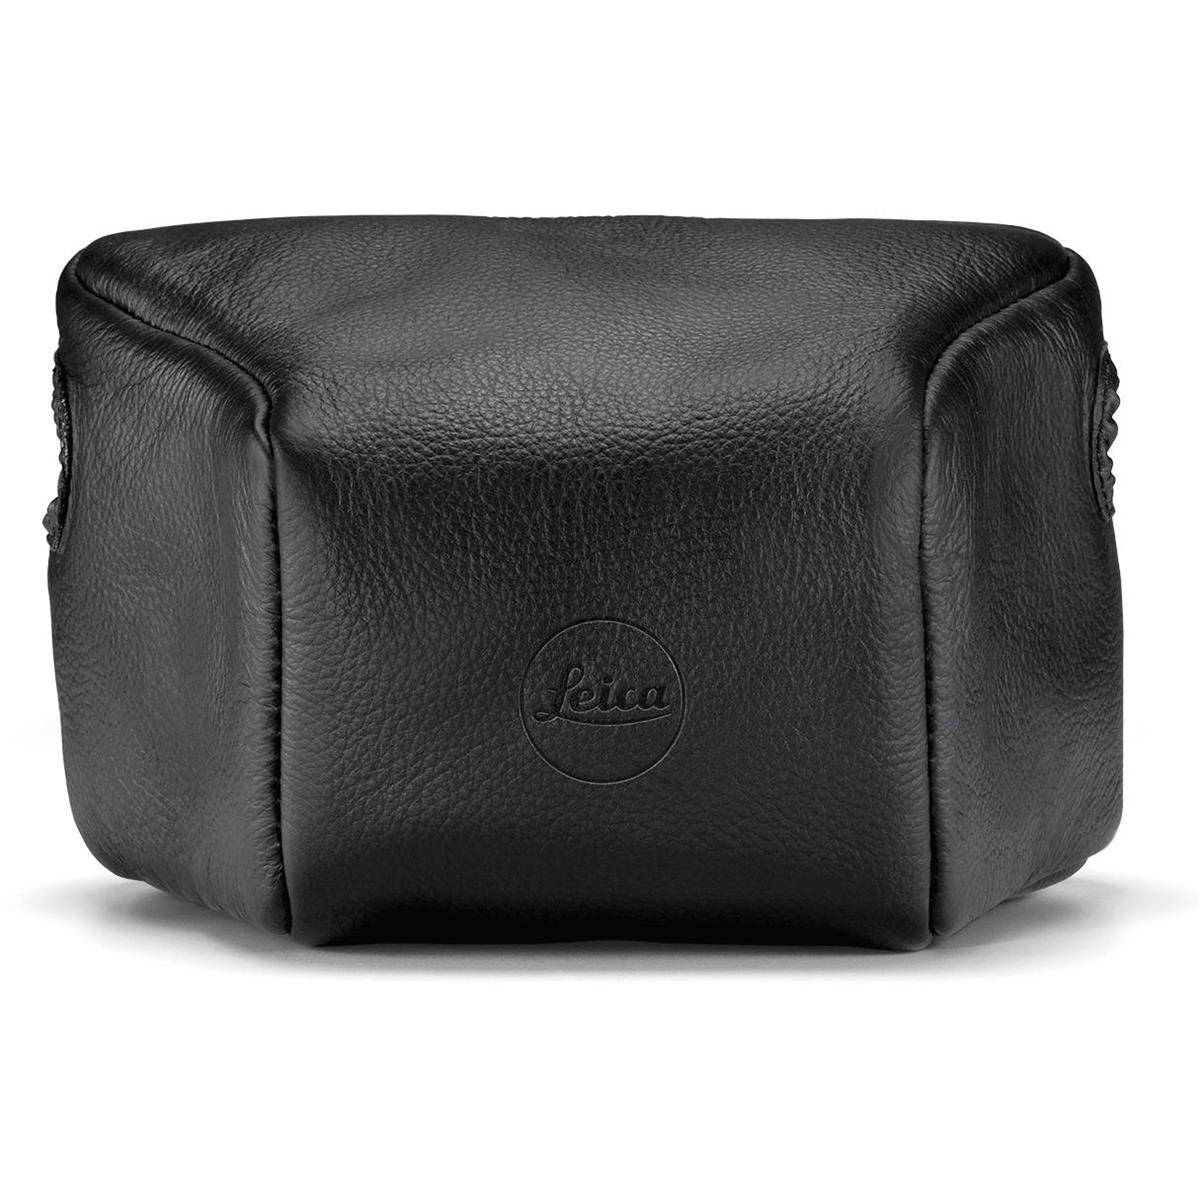 Image of Leica Leather Pouch for Leica M Cameras - Short